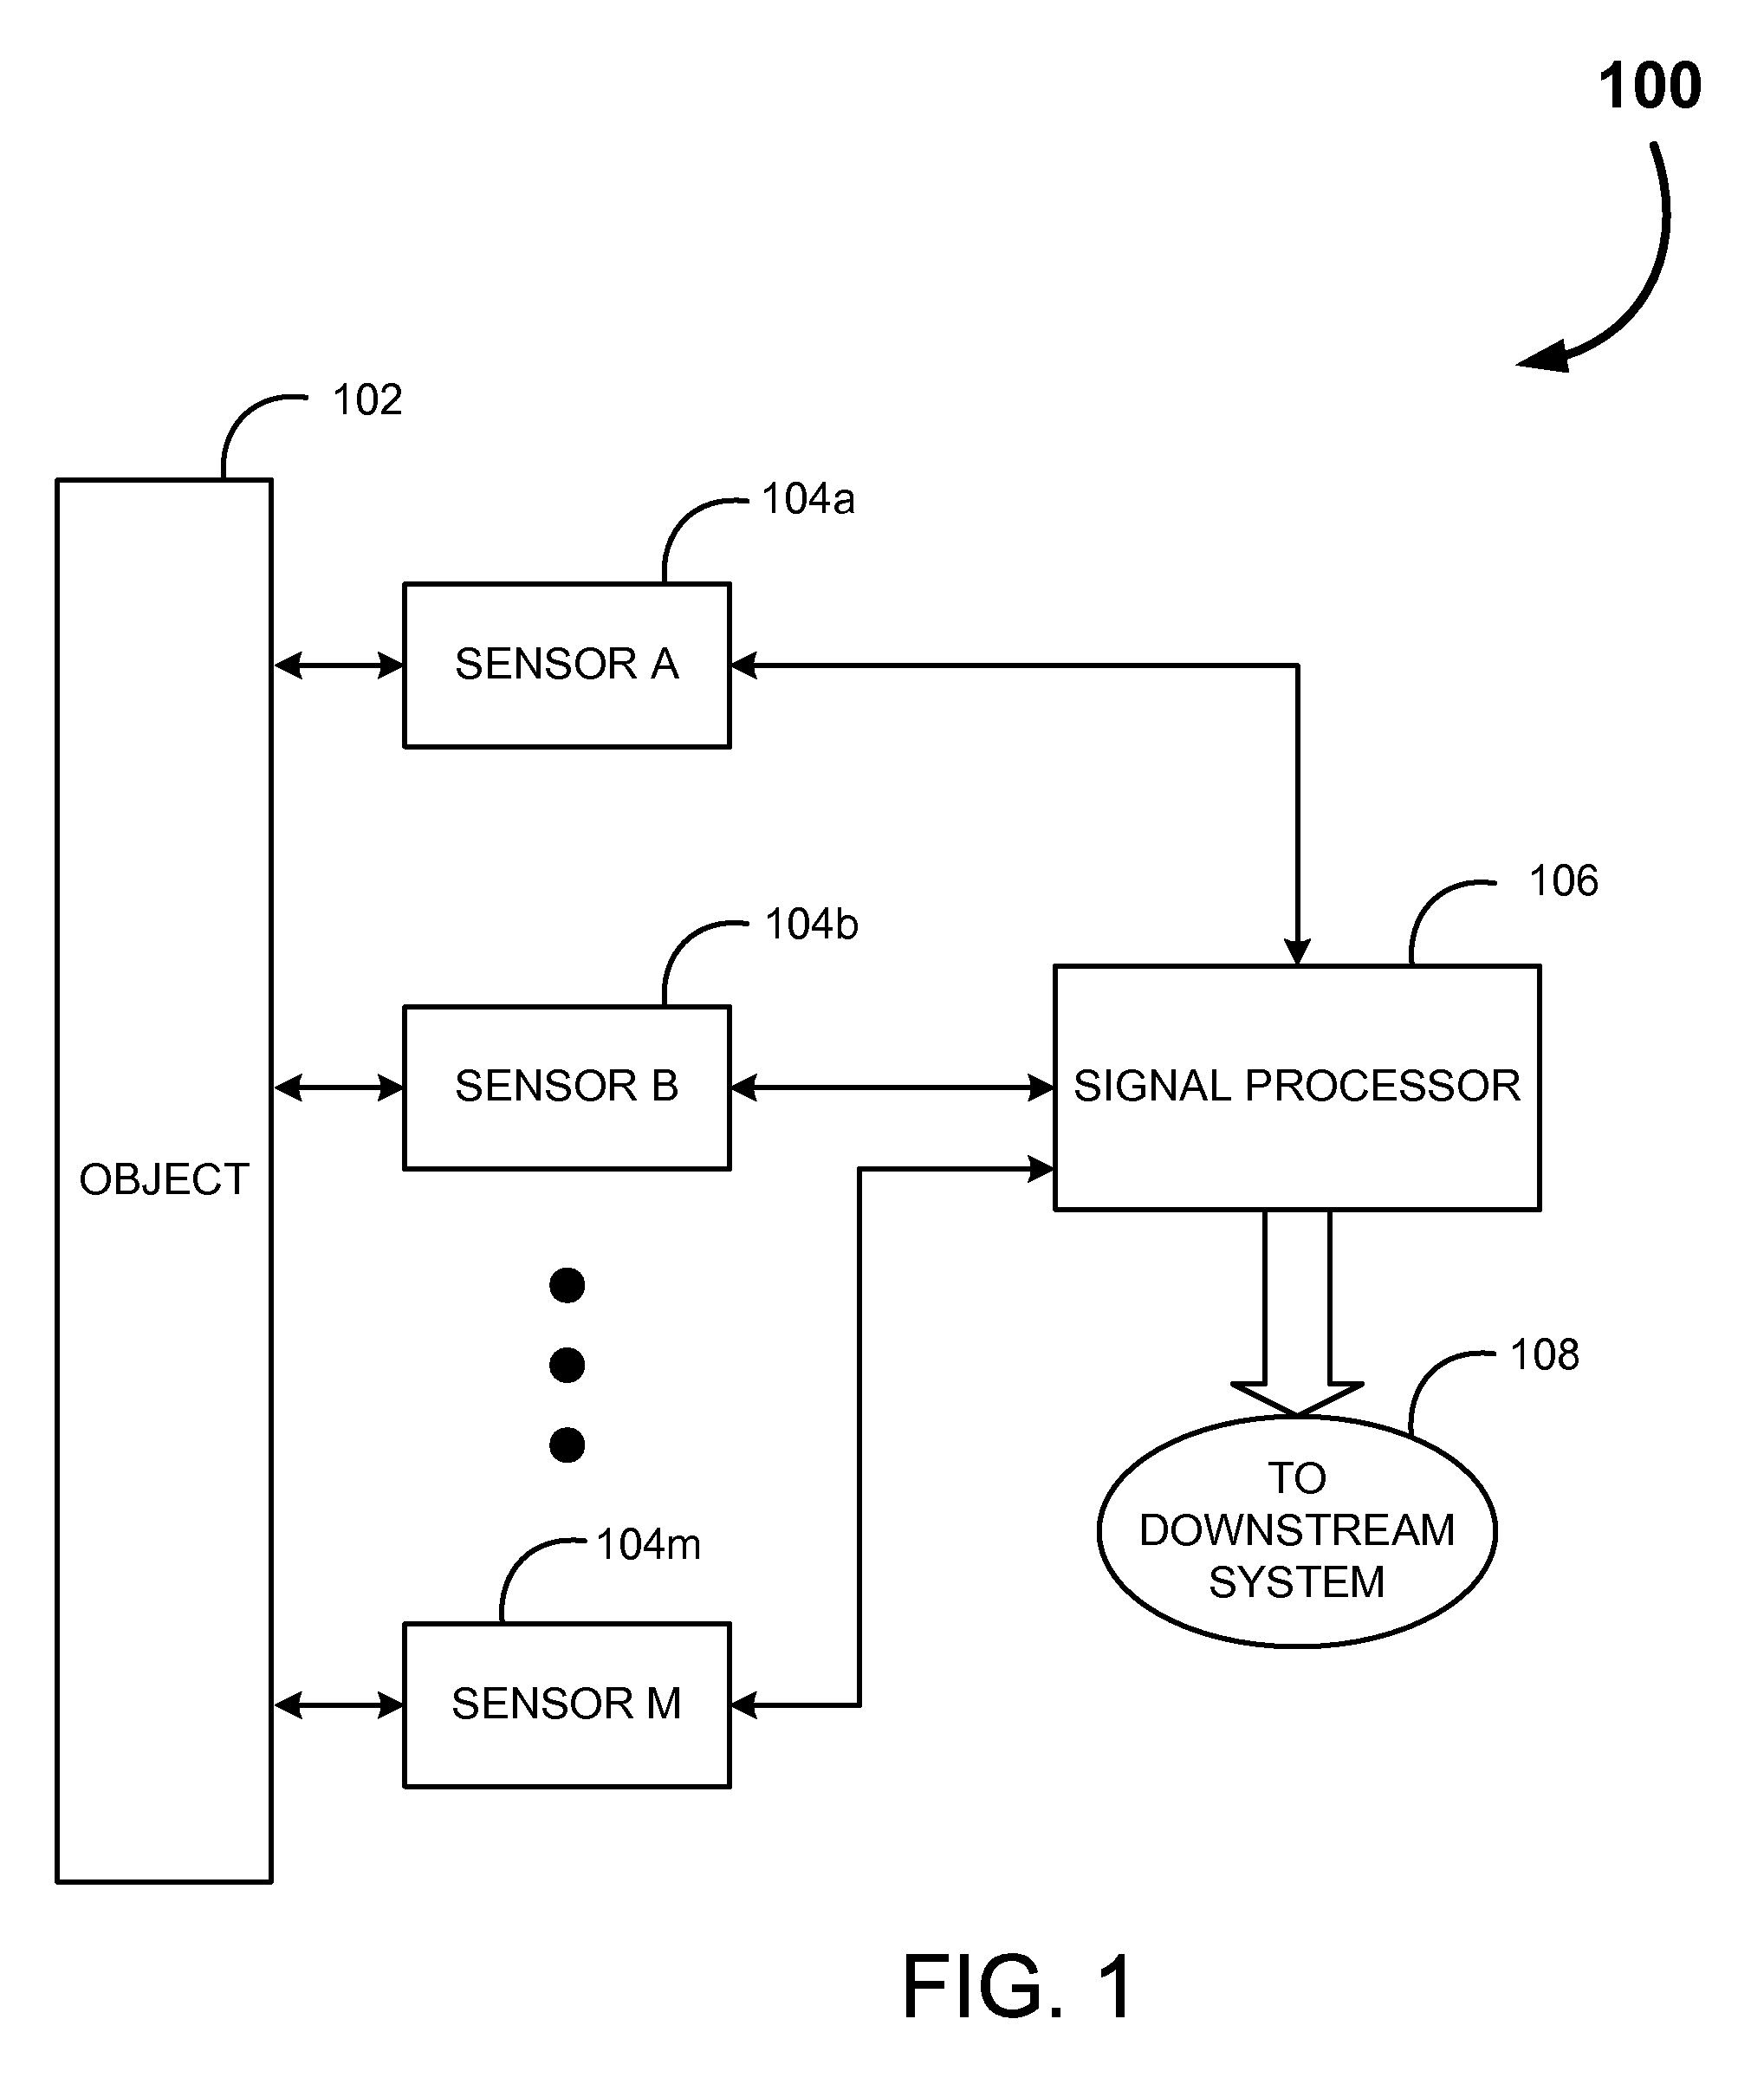 Systems and methods for an impact location and amplitude sensor